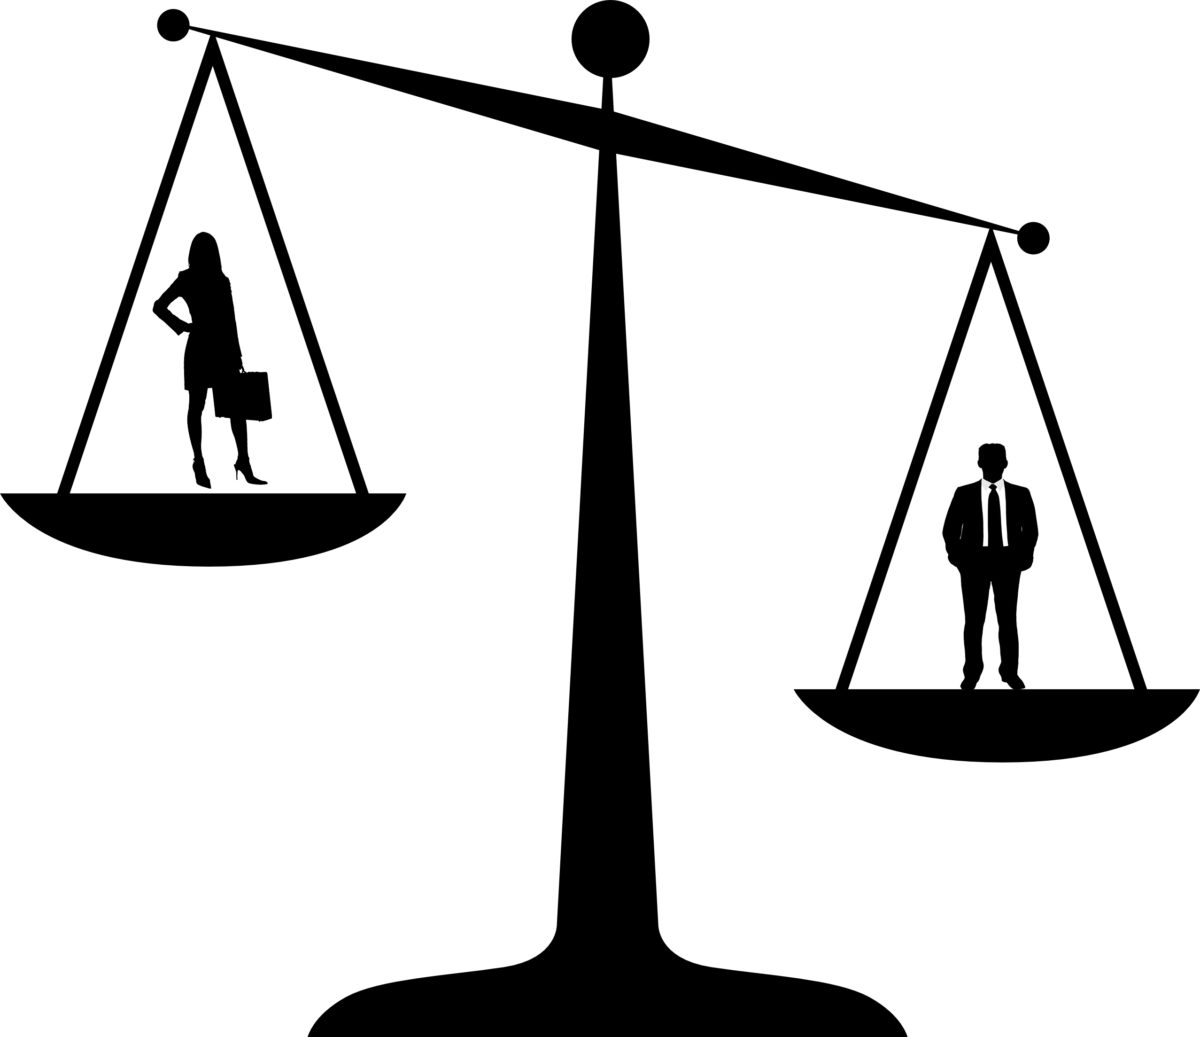 Opinion: Gender parity not equality - The Aquinian